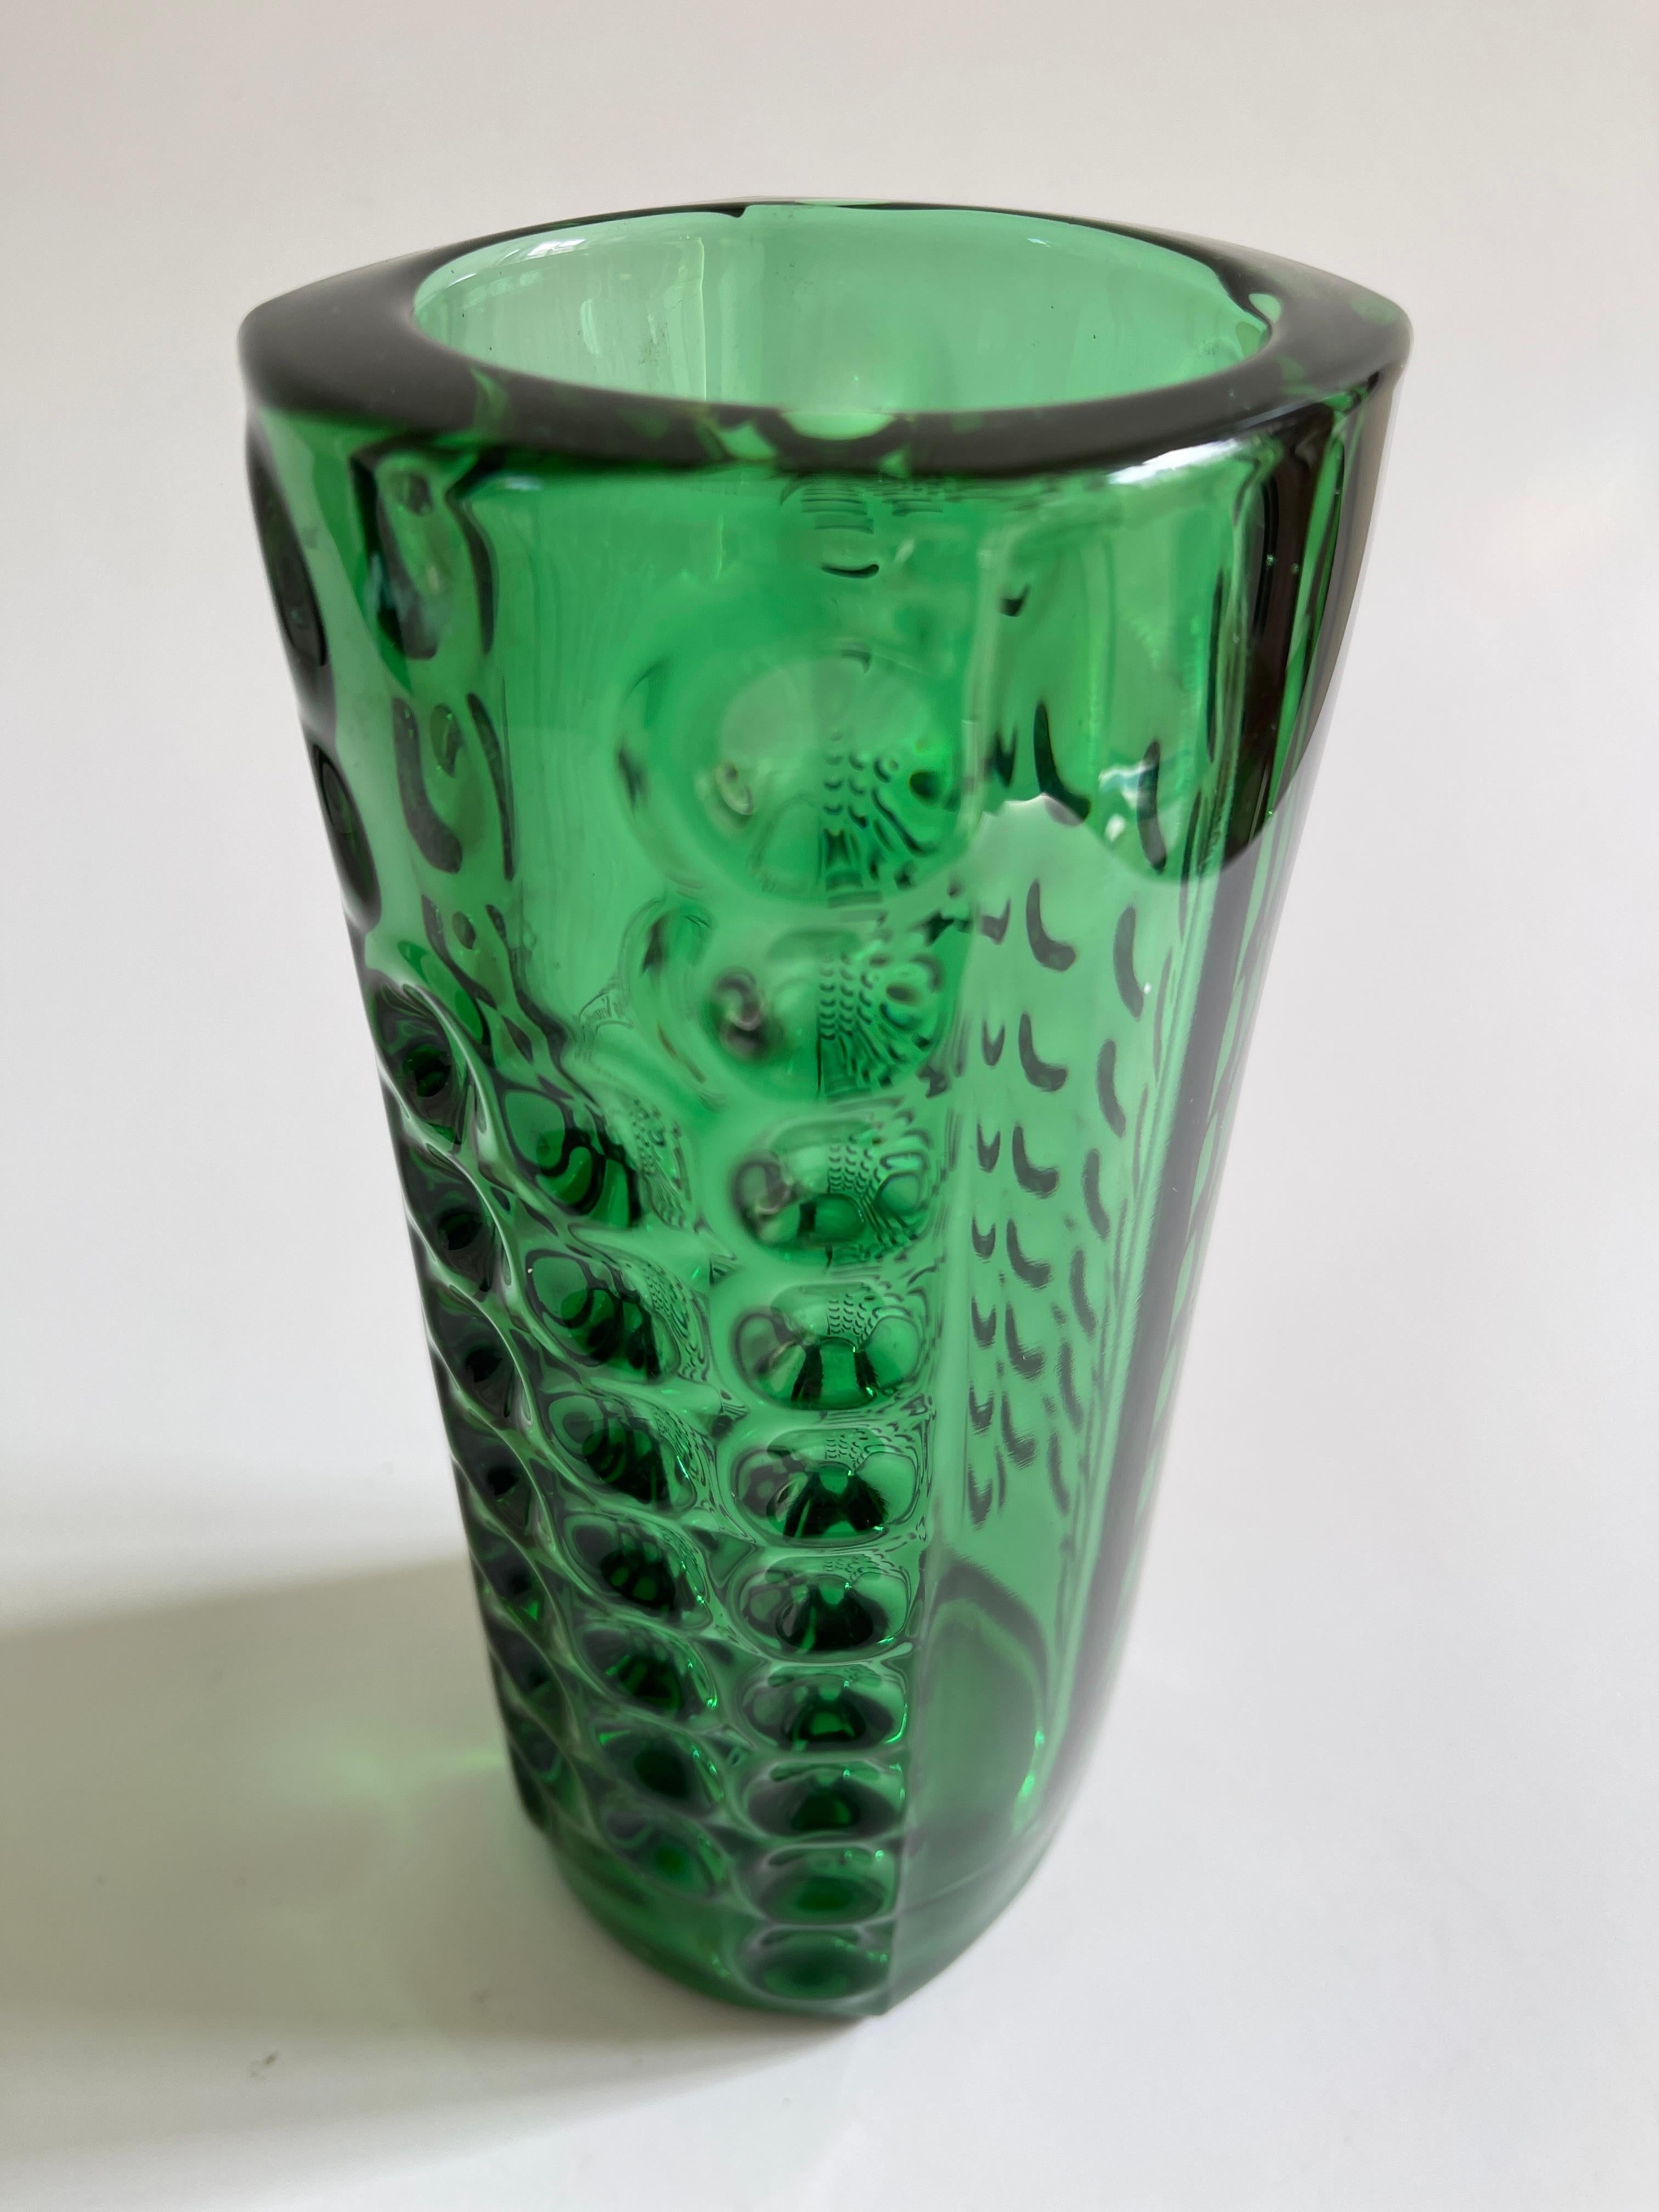 Midcentury emerald green optical glass vase by Rudolf Jurnikl in excellent condition. Czechoslovakia, circa 1960s.